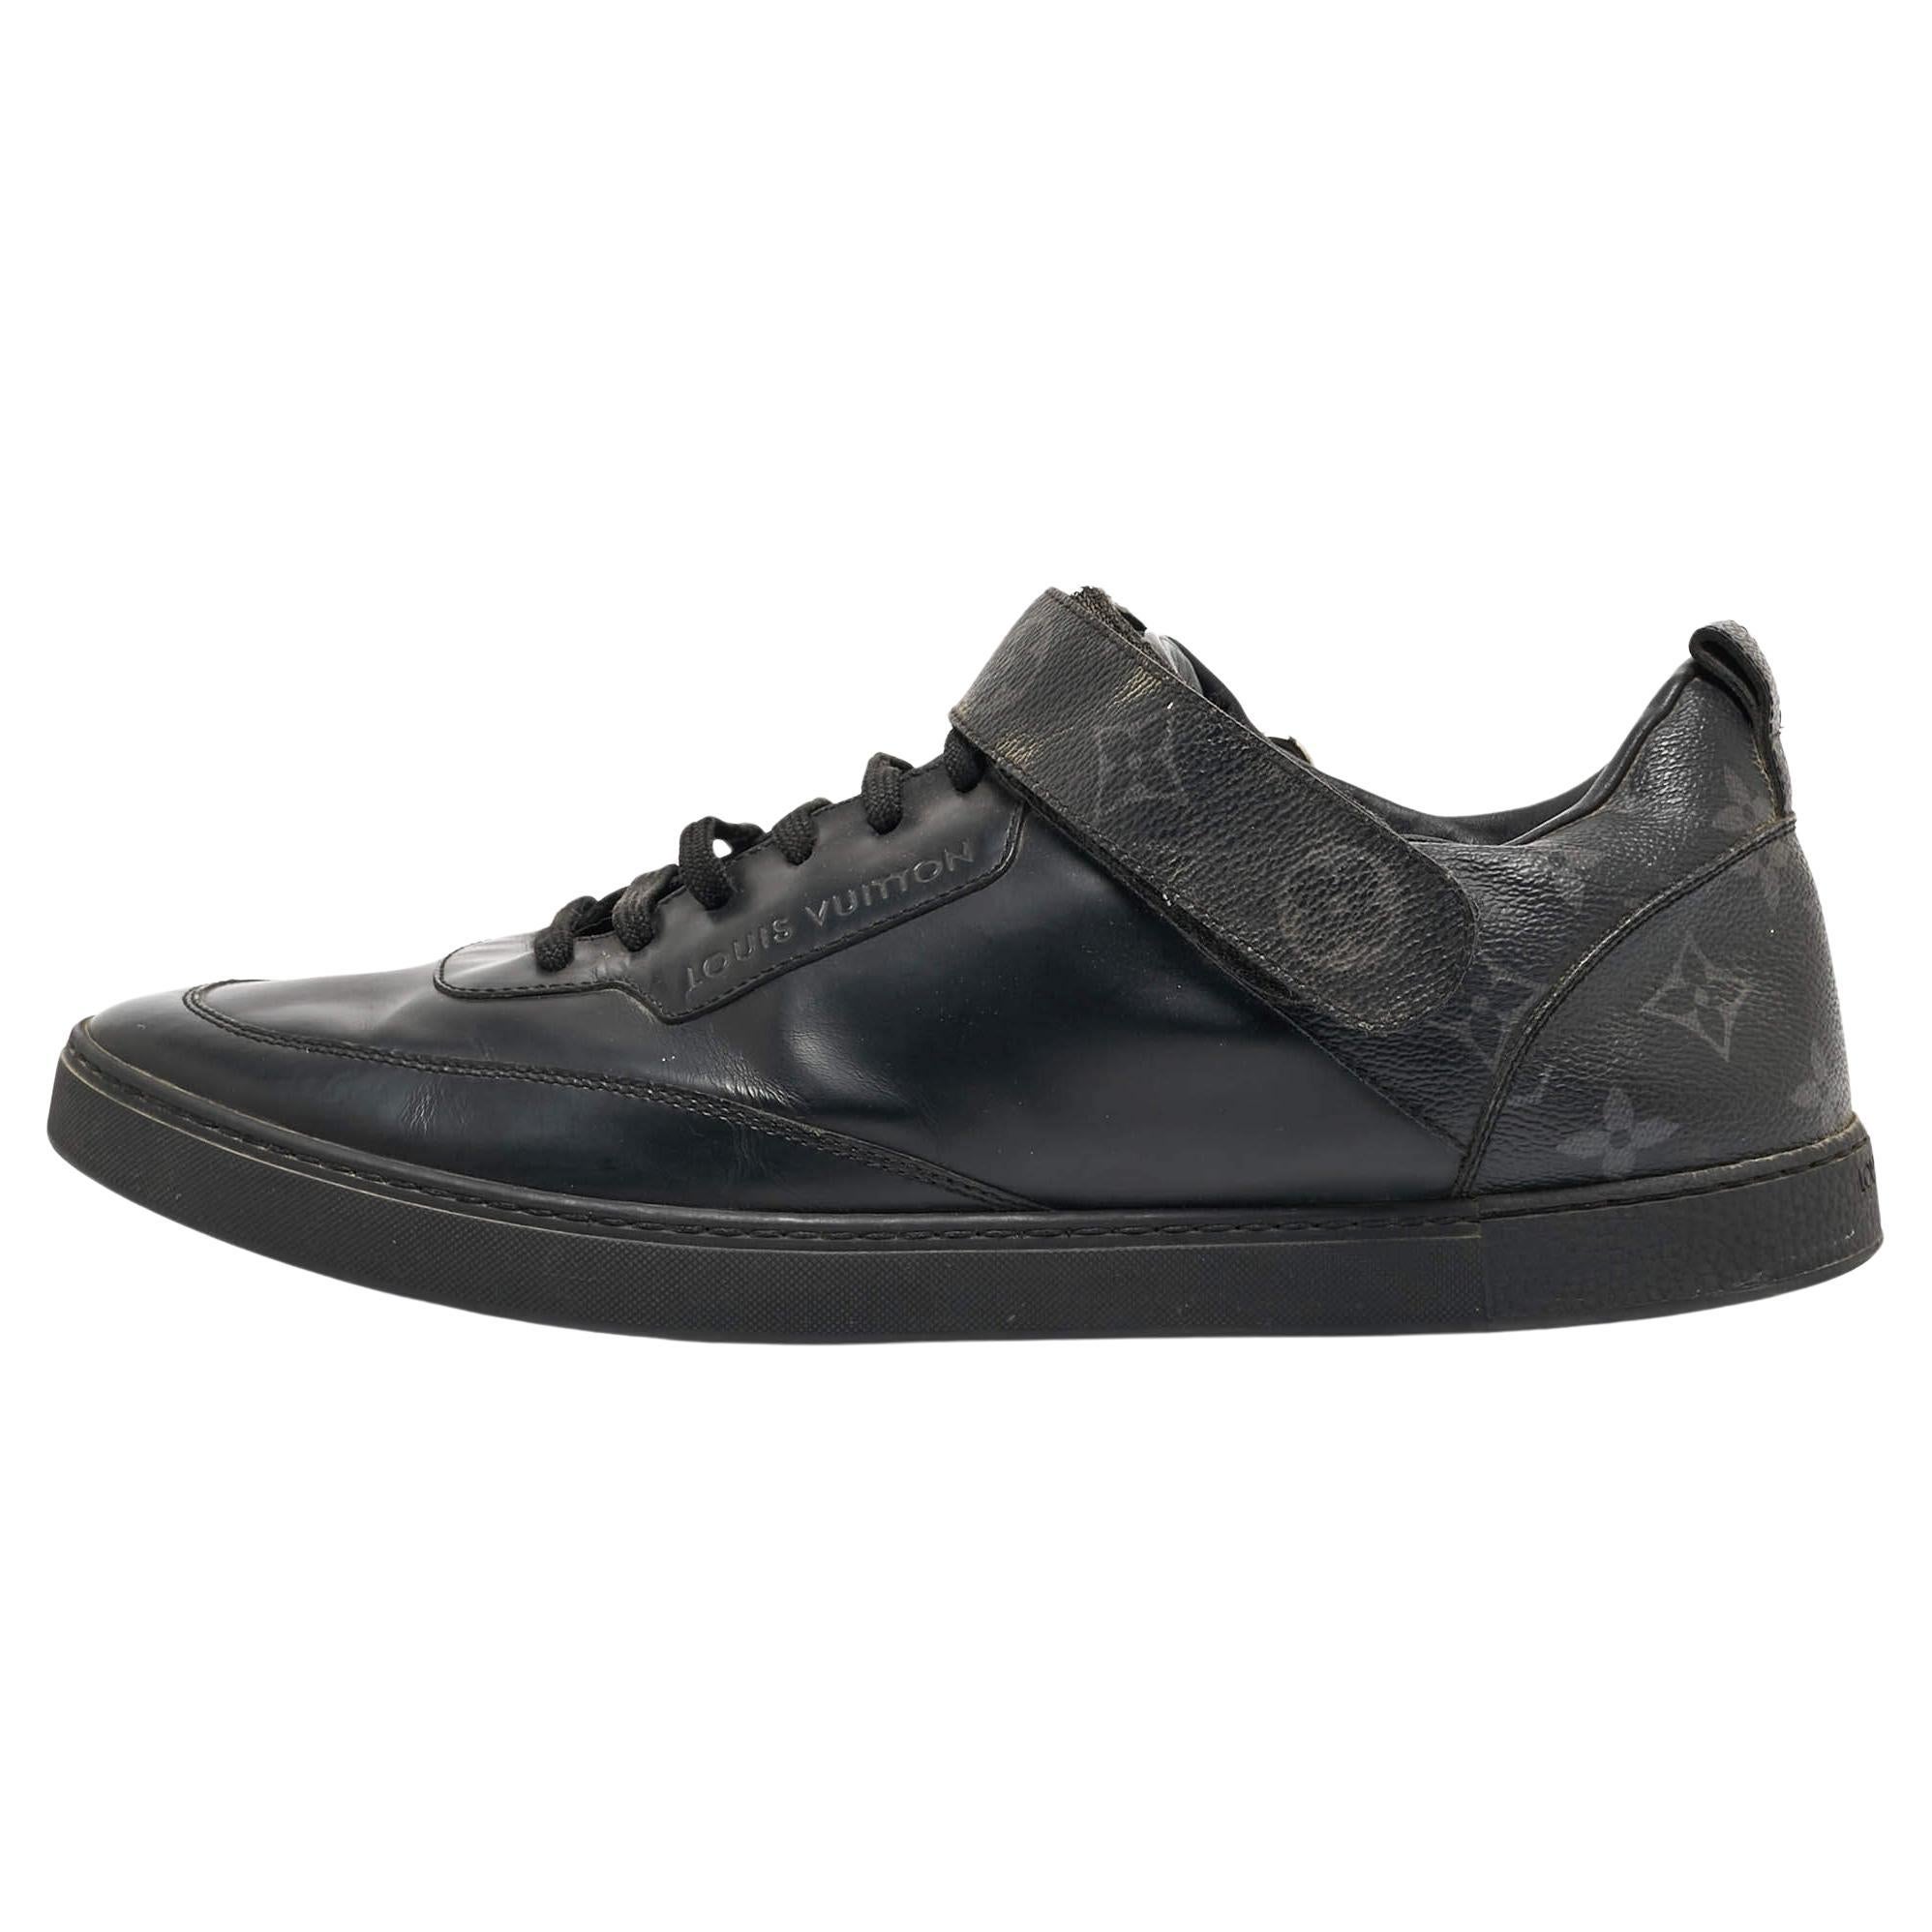 Louis Vuitton Black Leather and Monogram Canvas Passenger Sneakers Size 42.5 For Sale